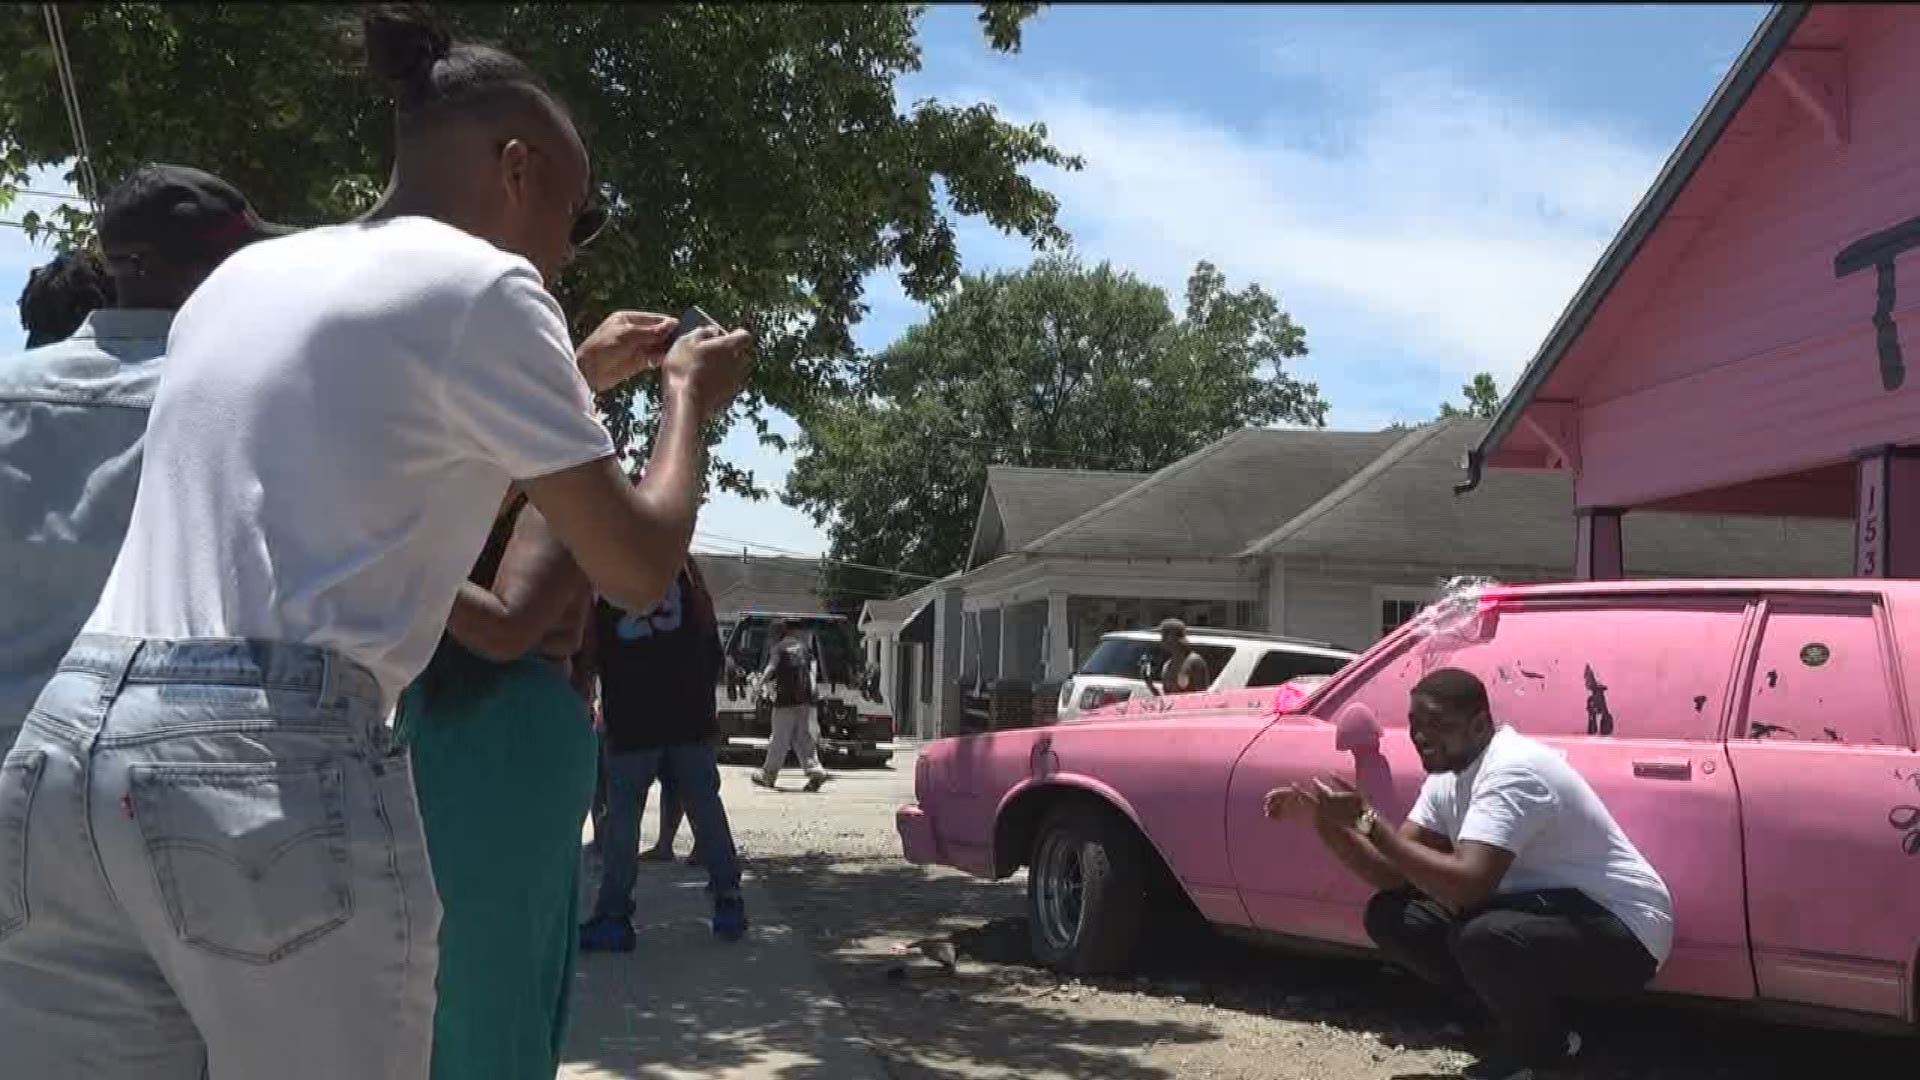 Car At Atlanta S Pink Trap House Towed Away After Complaints Cbs19 Tv